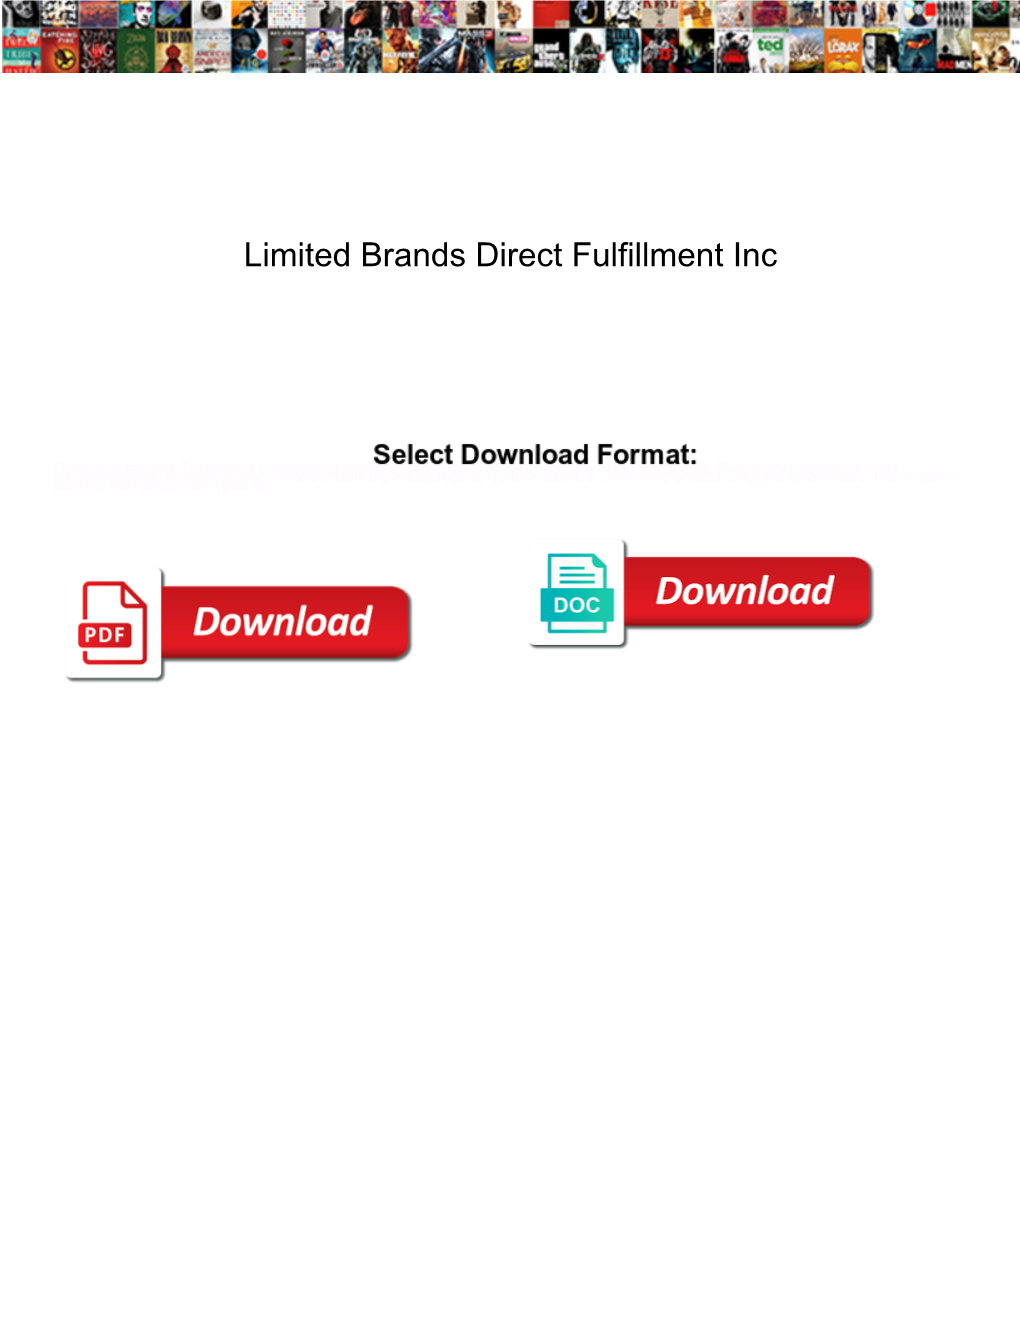 Limited Brands Direct Fulfillment Inc